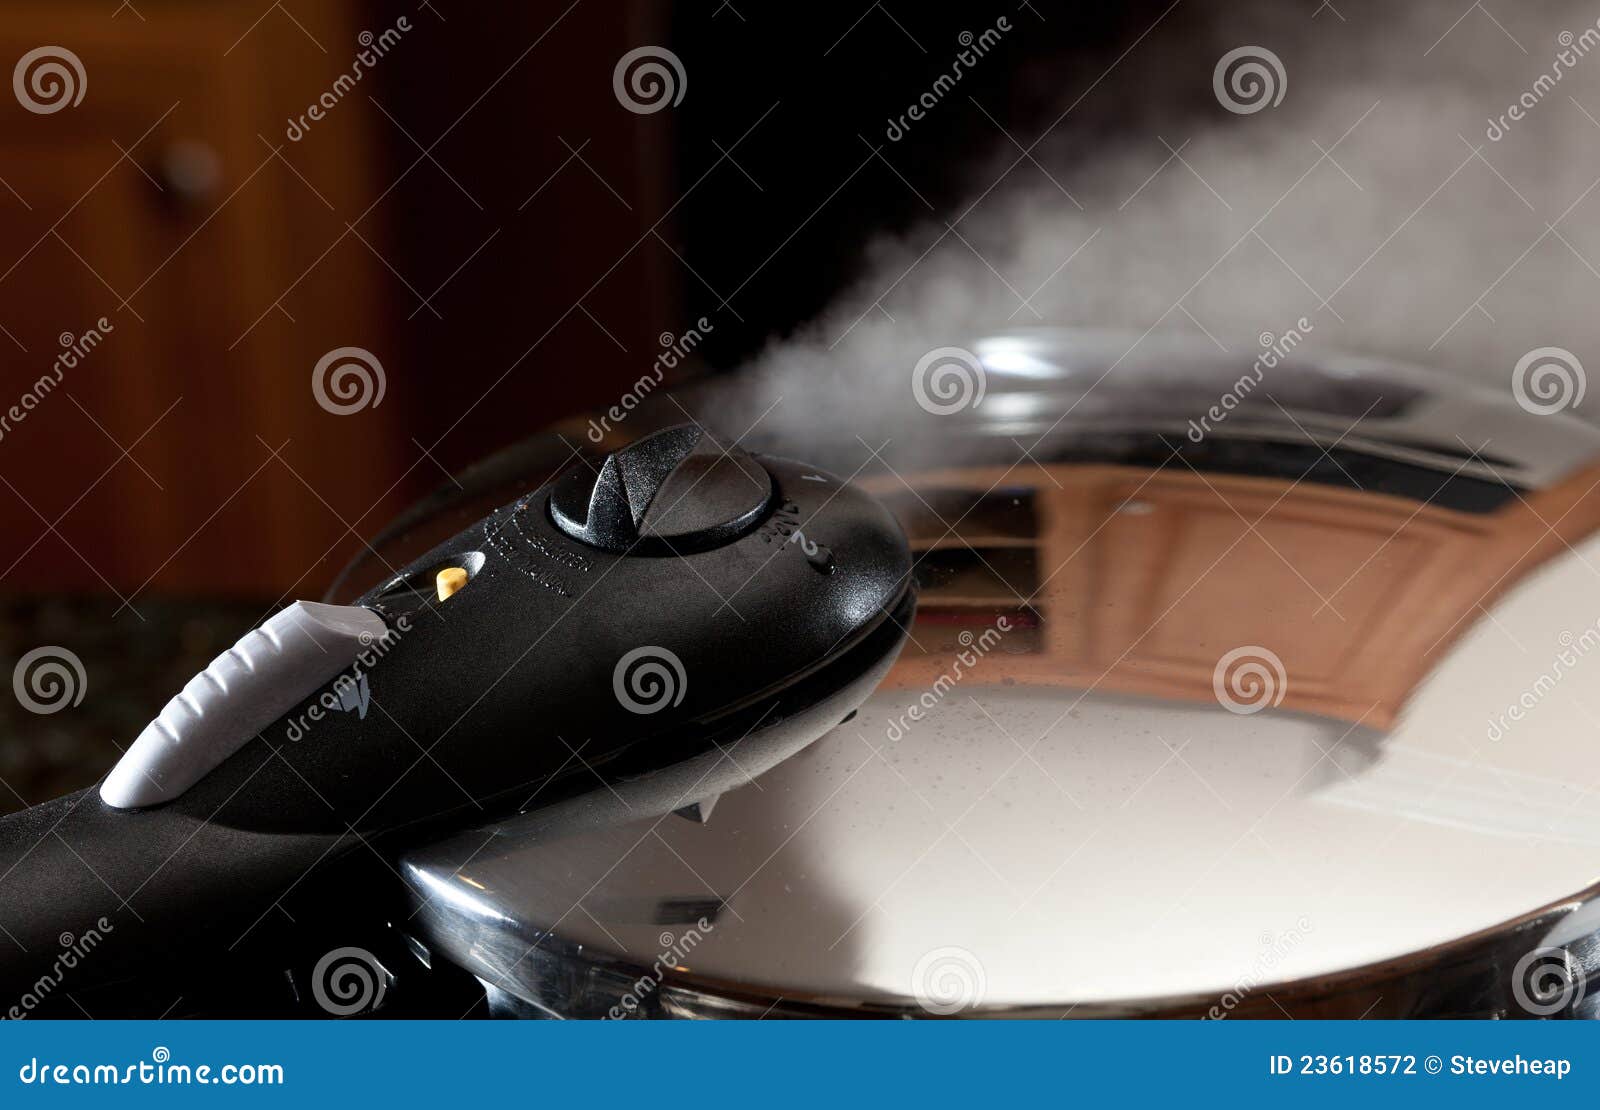 steam escaping from new pressure cooker pot